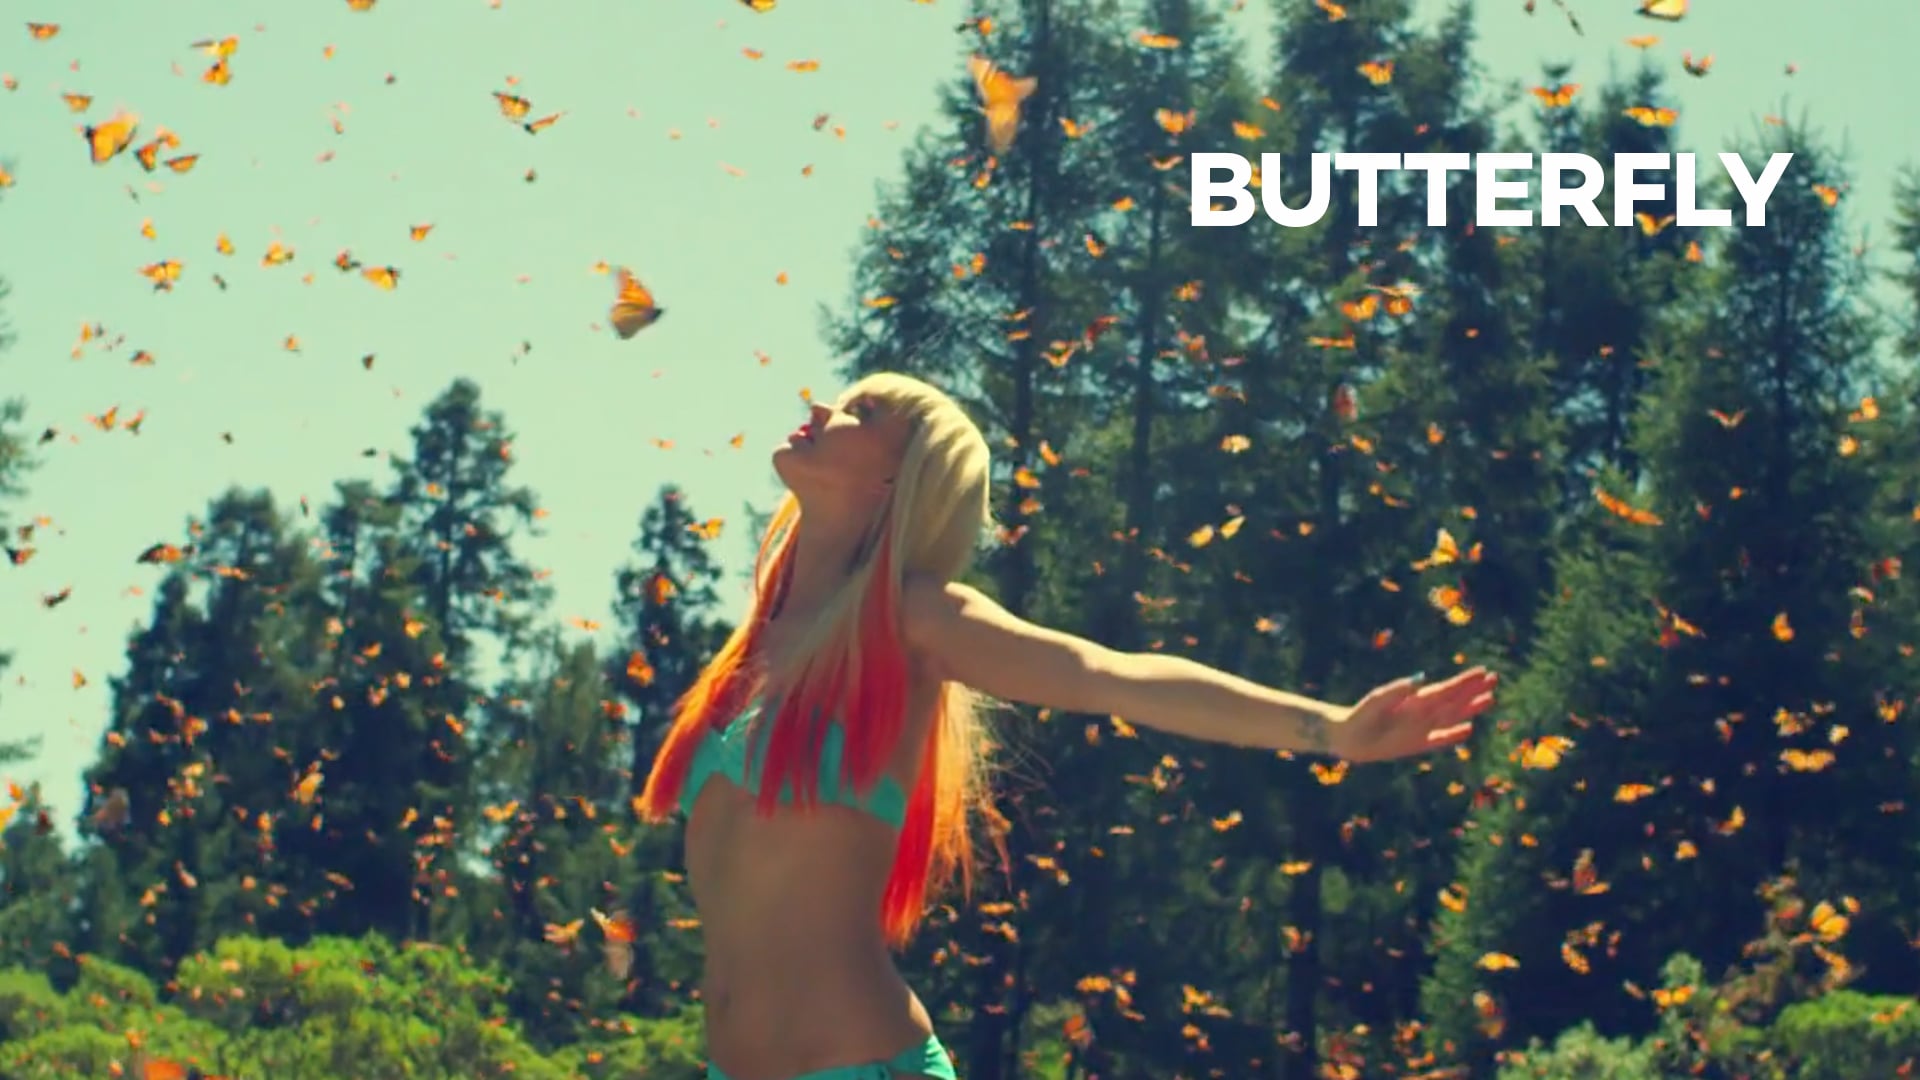 THE BUTTERFLY STORY (COMMERCIAL)